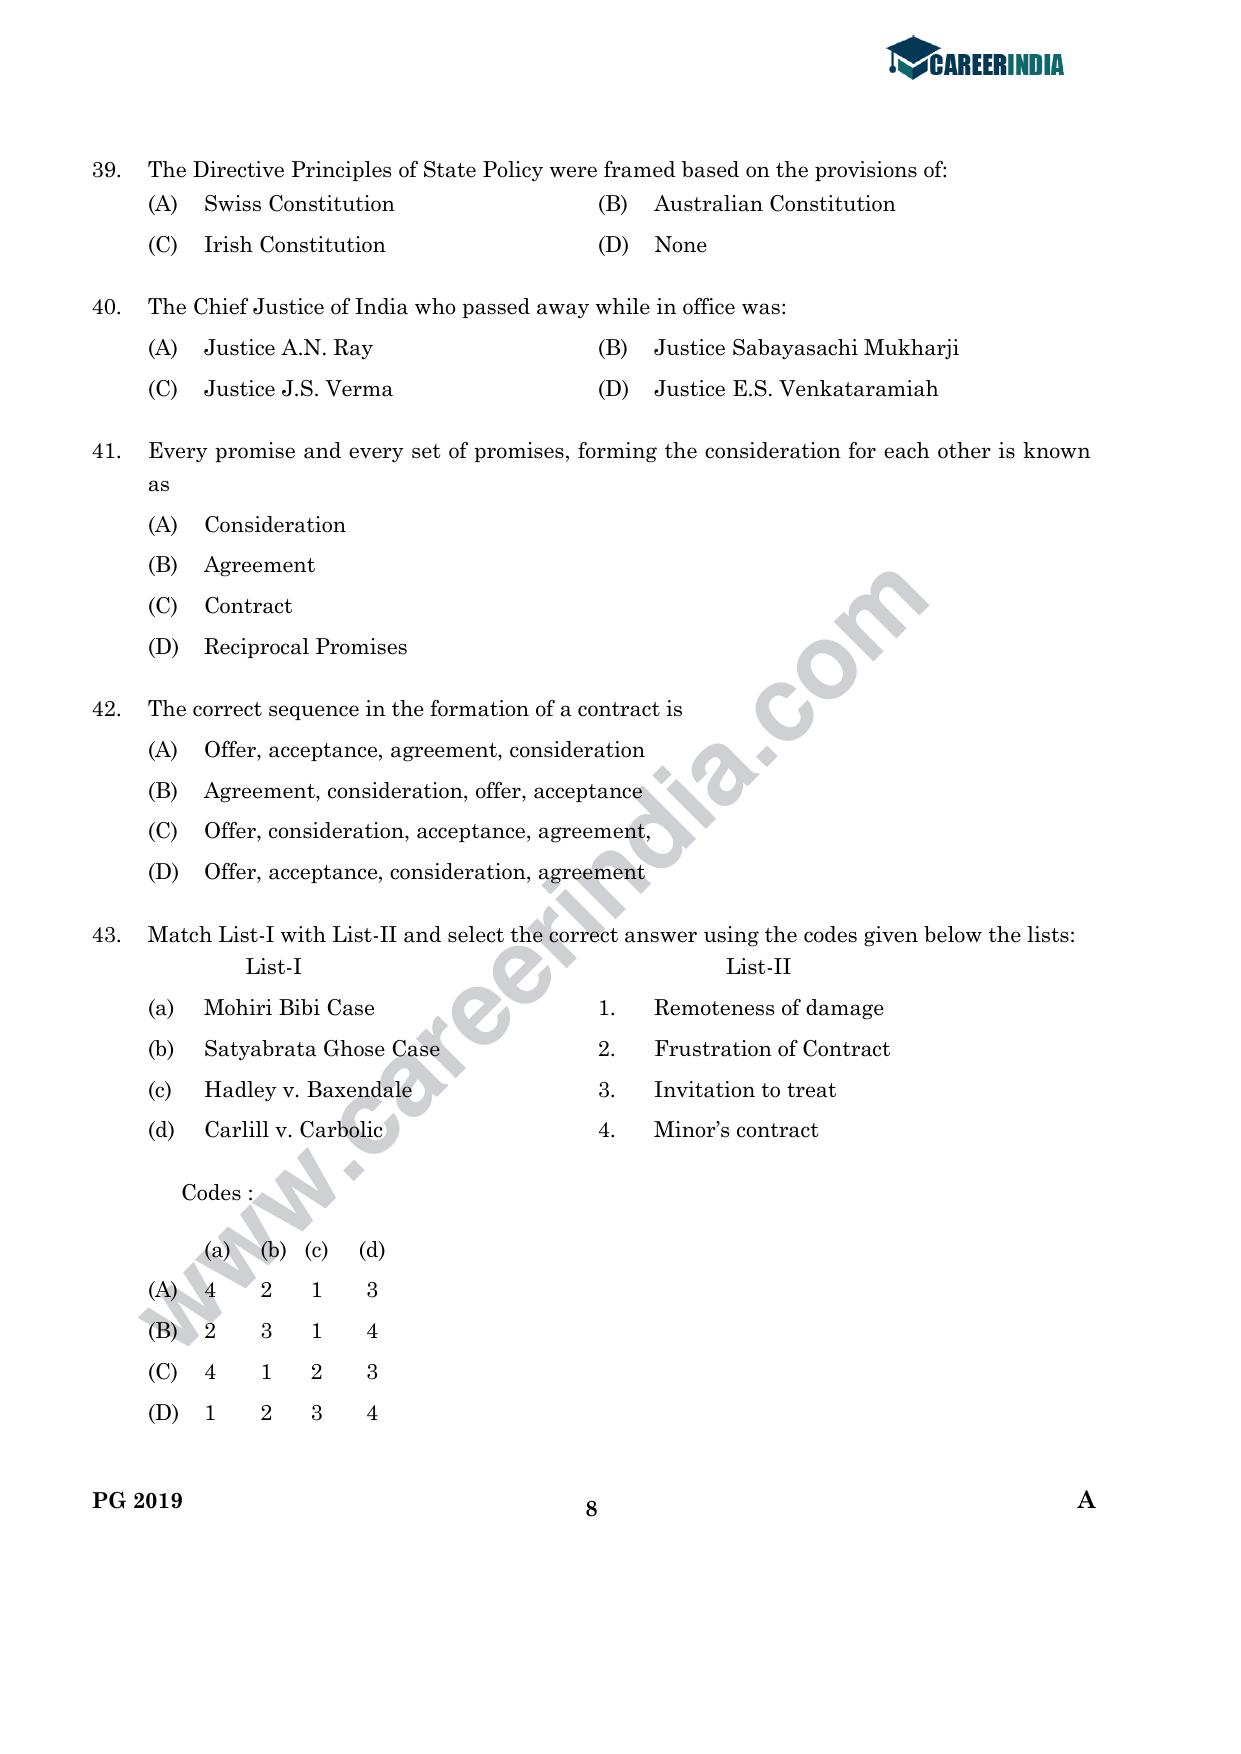 CLAT 2019 PG A-Series Question Papers (C.L.A.) - Page 7